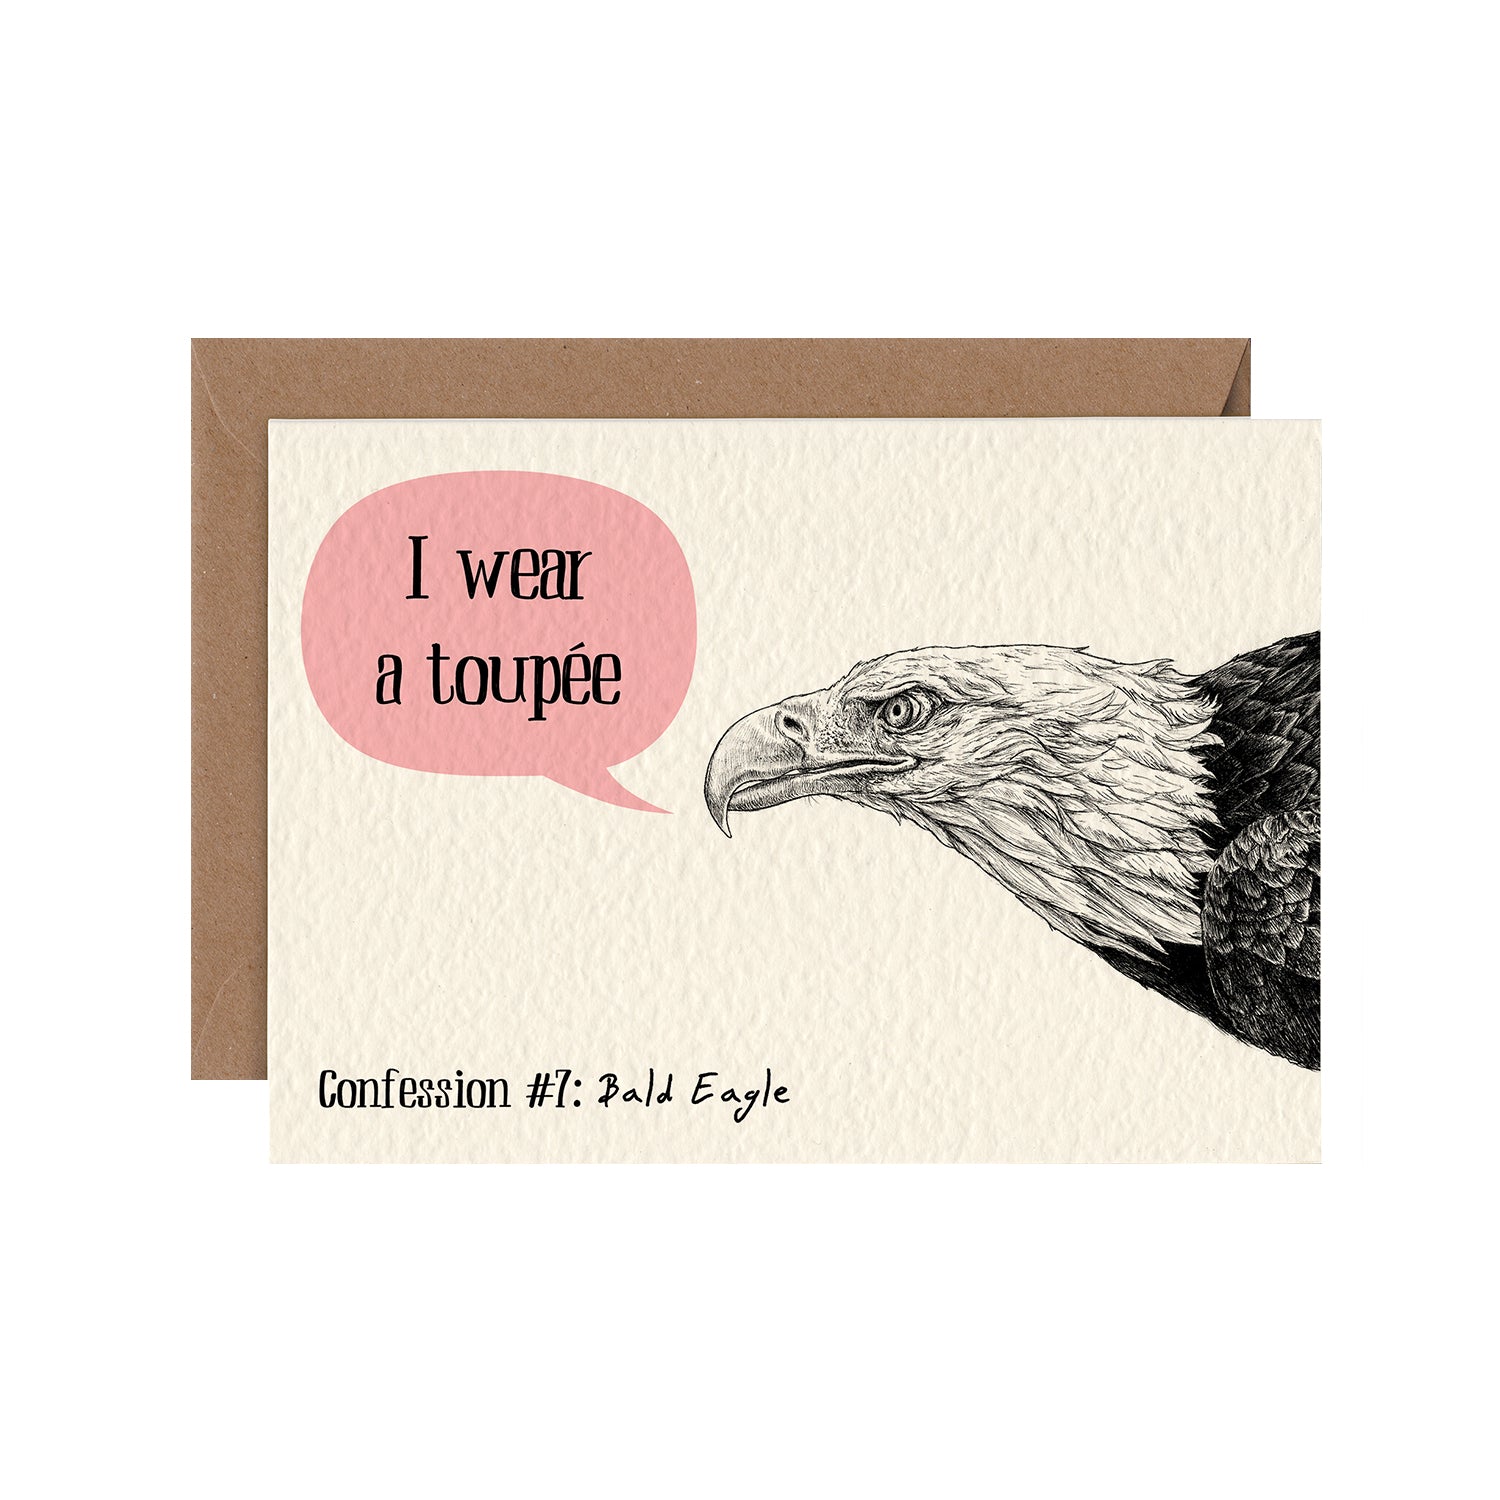 A cream card featuring the realistic illustrated face of a bald eagle with a pink speech bubble reading &quot;I wear a toupée&quot;, with the caption &quot;Confession 